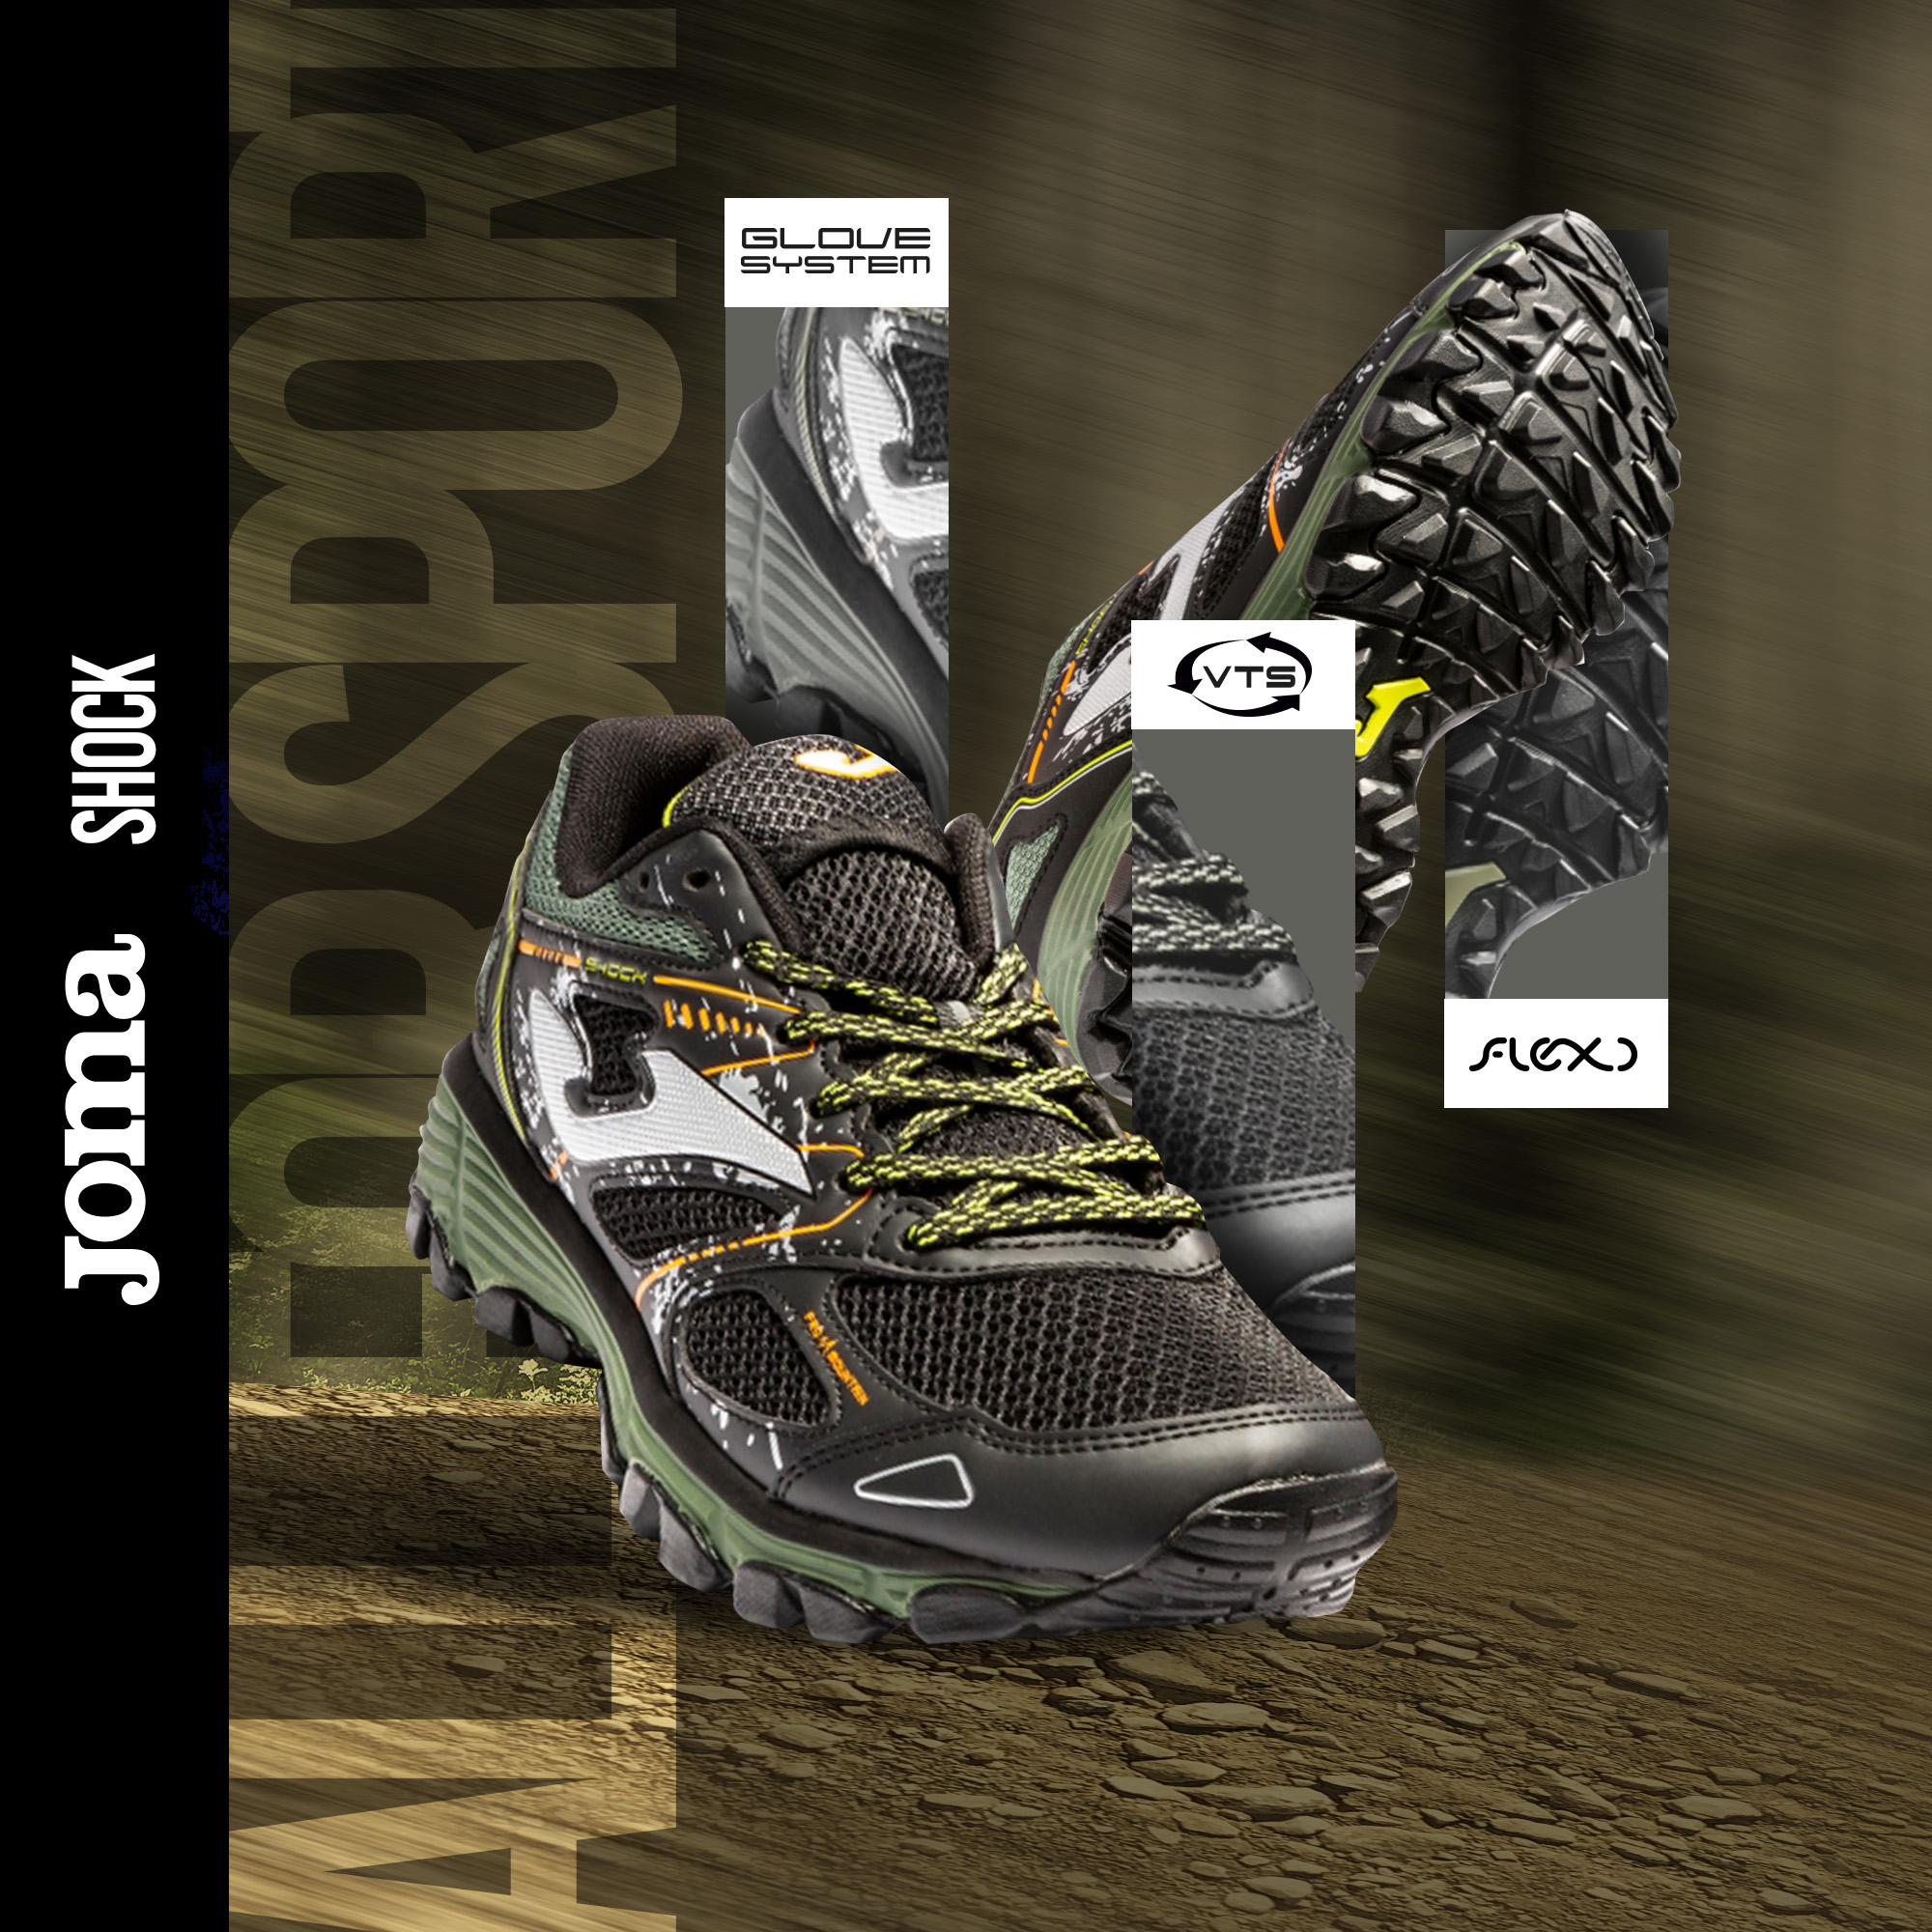 Joma Sport Ireland on Twitter: "The Joma Shock Trail Shoe: An abrasion-resistant rubber outsole comprising strategically placed studs to gain grip going up and down hill on rough mountain terrains. #JomaSportIRL #